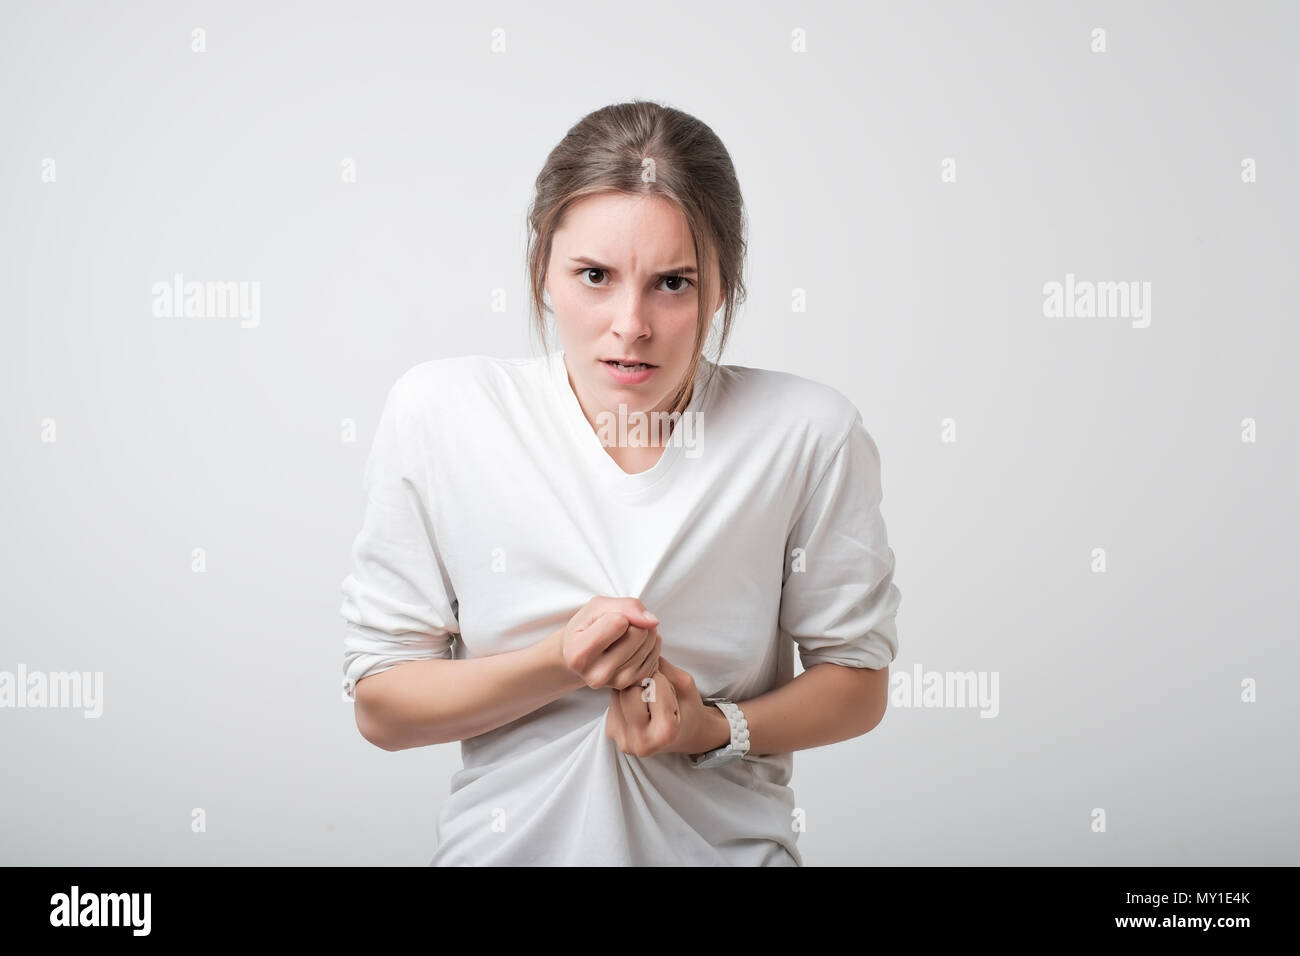 Picture of enraged dissatisfied young caucasian teenager grimacing and making angry gesture while feeling furious Stock Photo